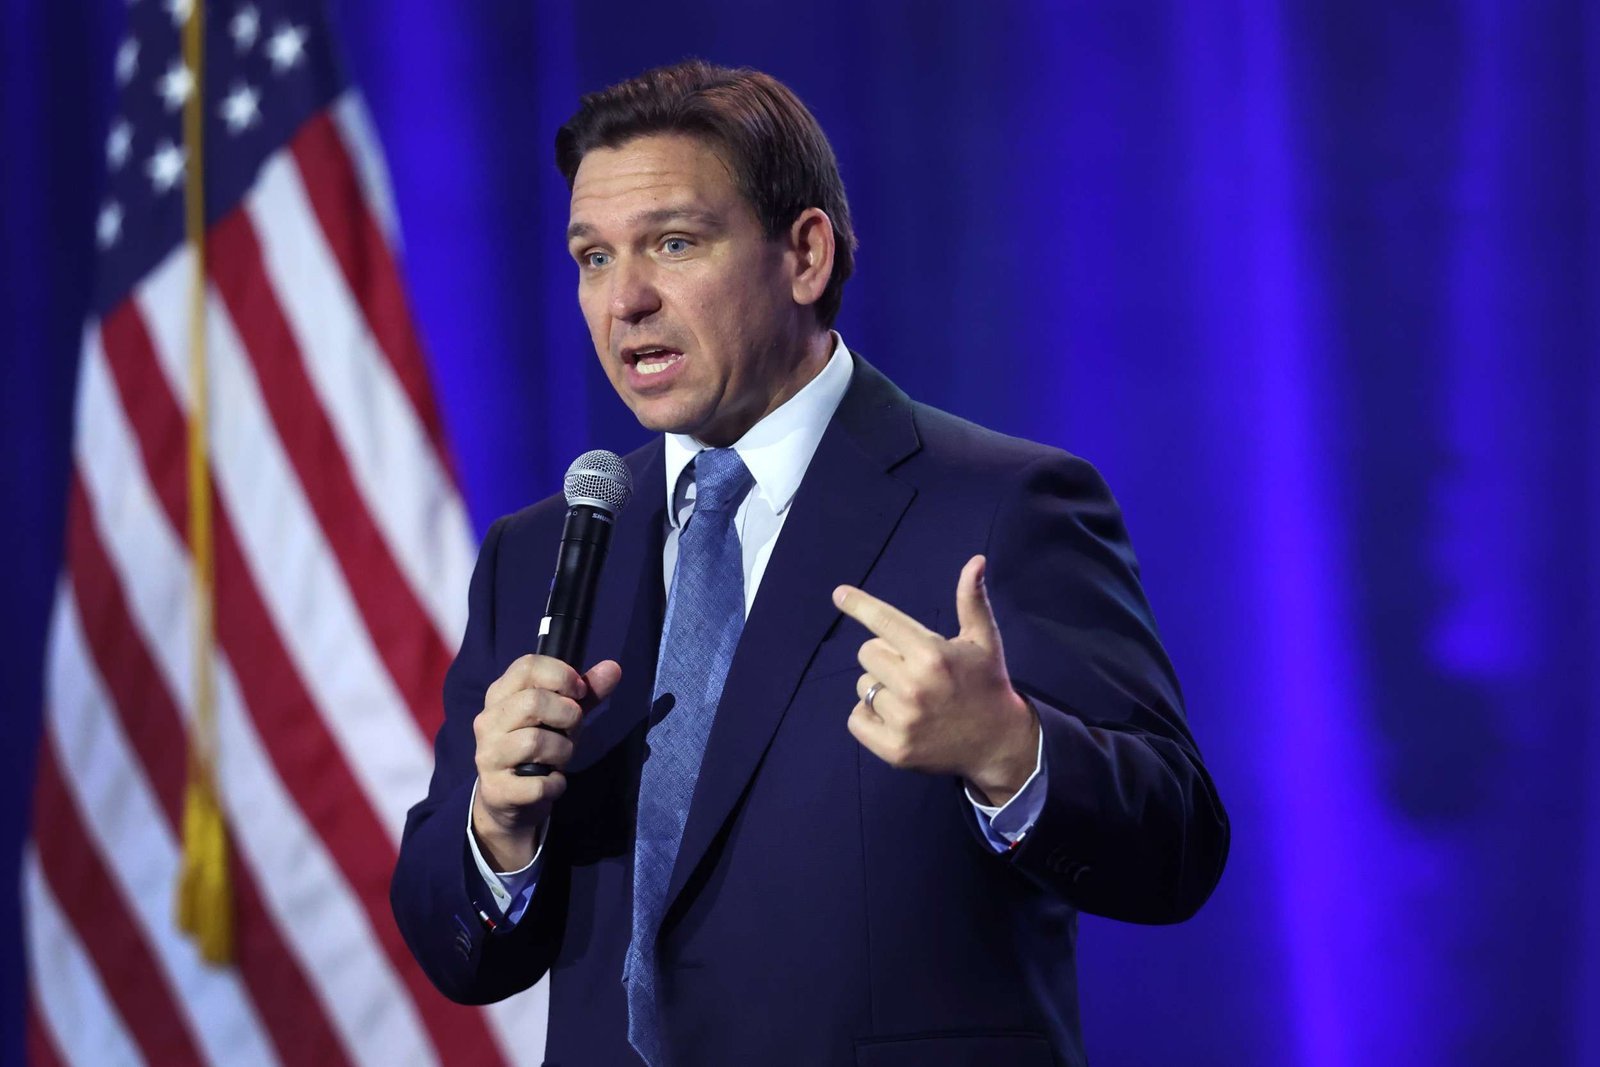 DeSantis-Says-Only-he-can-Beat-Biden-in-2024-Presidential-Election